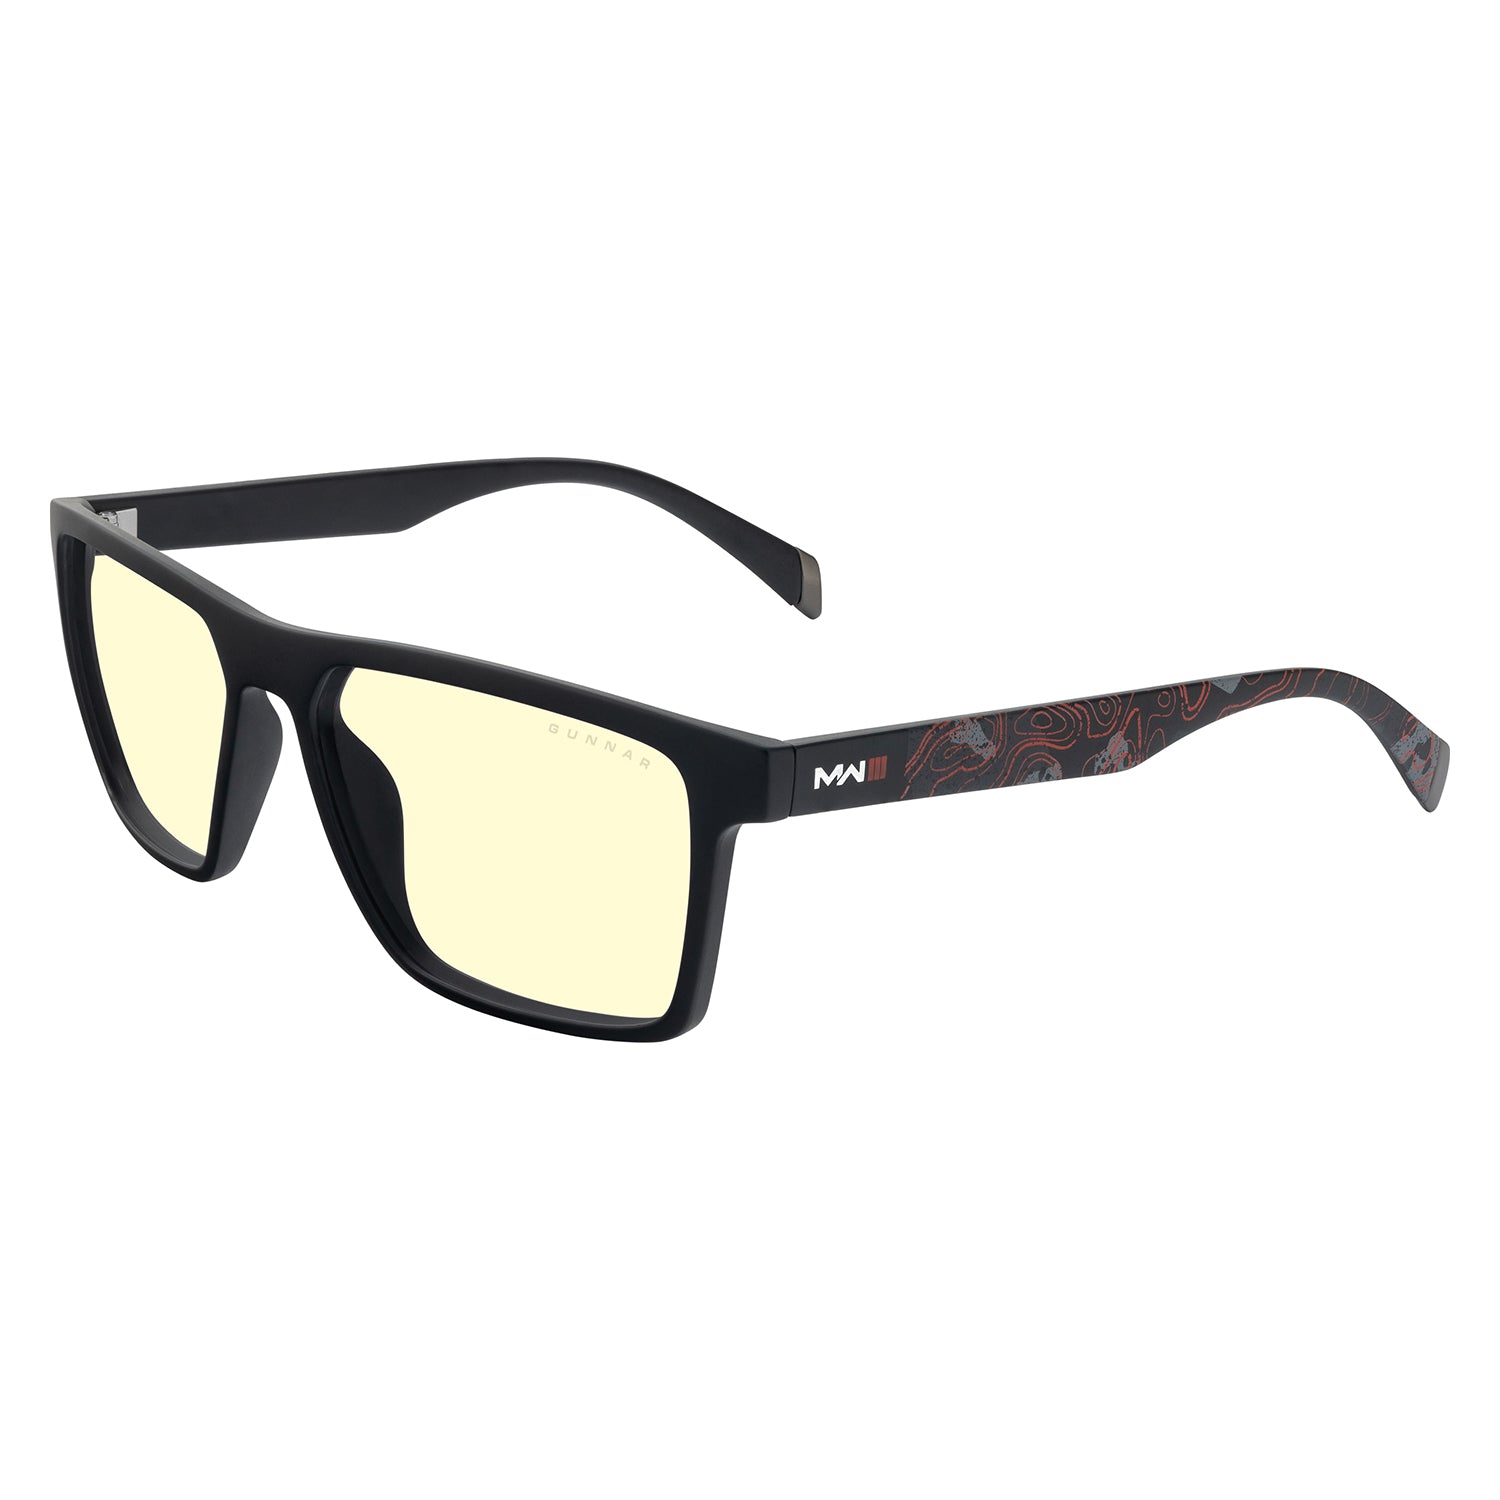 Call of Duty Alpha Edition Gunnar Blue Light Gaming Glasses - Angled view